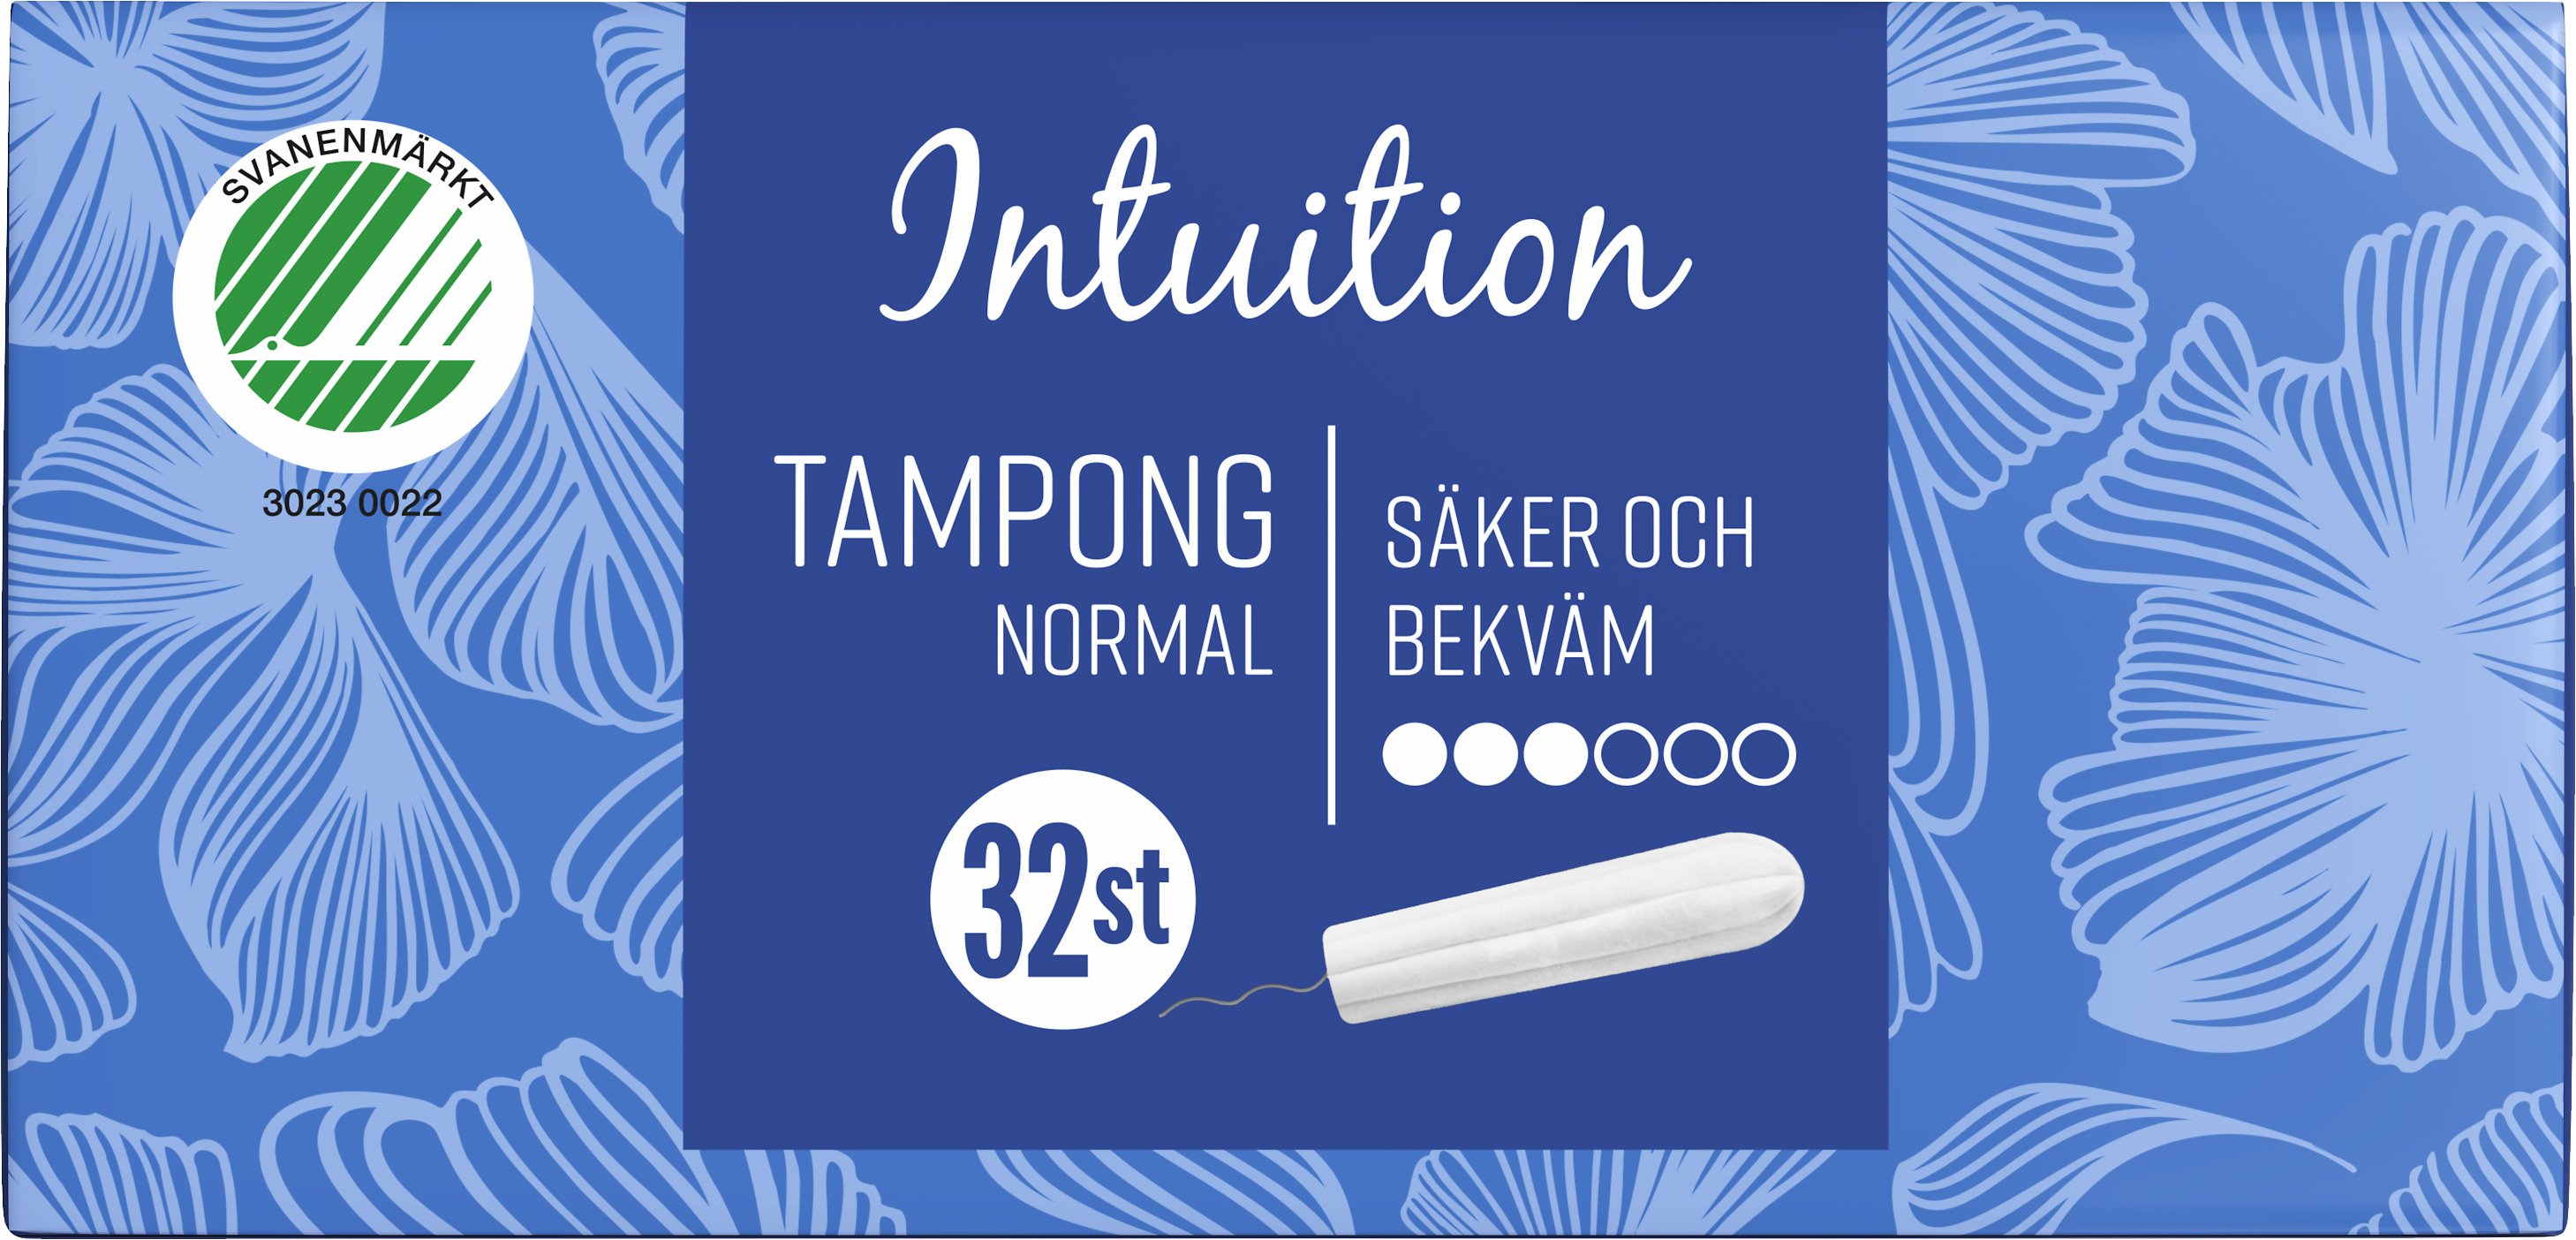 Intuition Tampong Normal 32 st